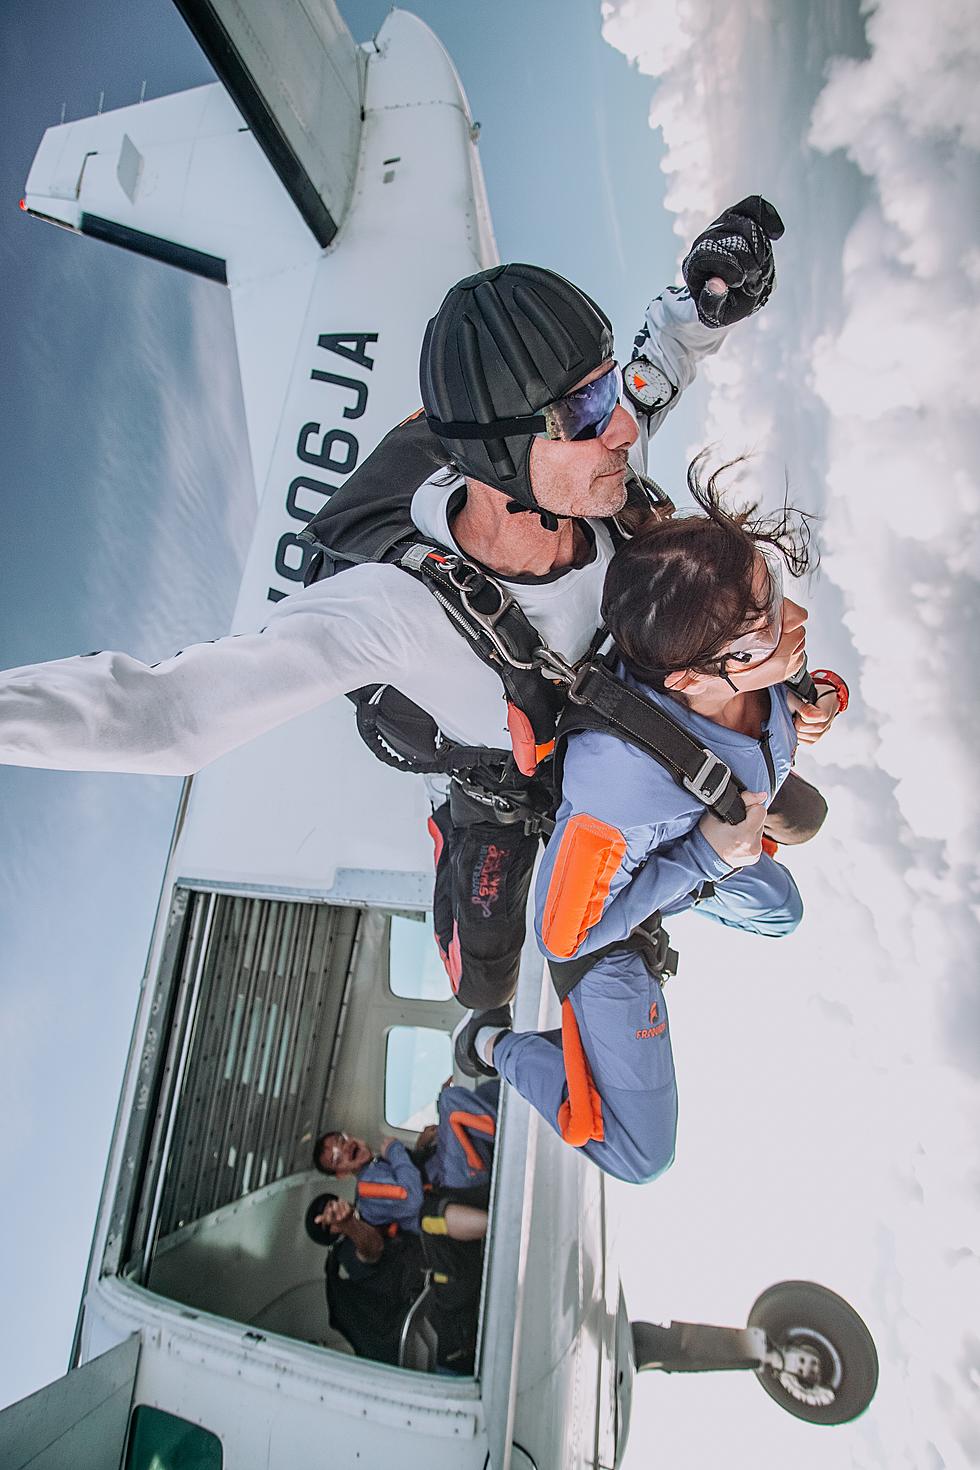 World Record Skydives Naked From an Aeroplane